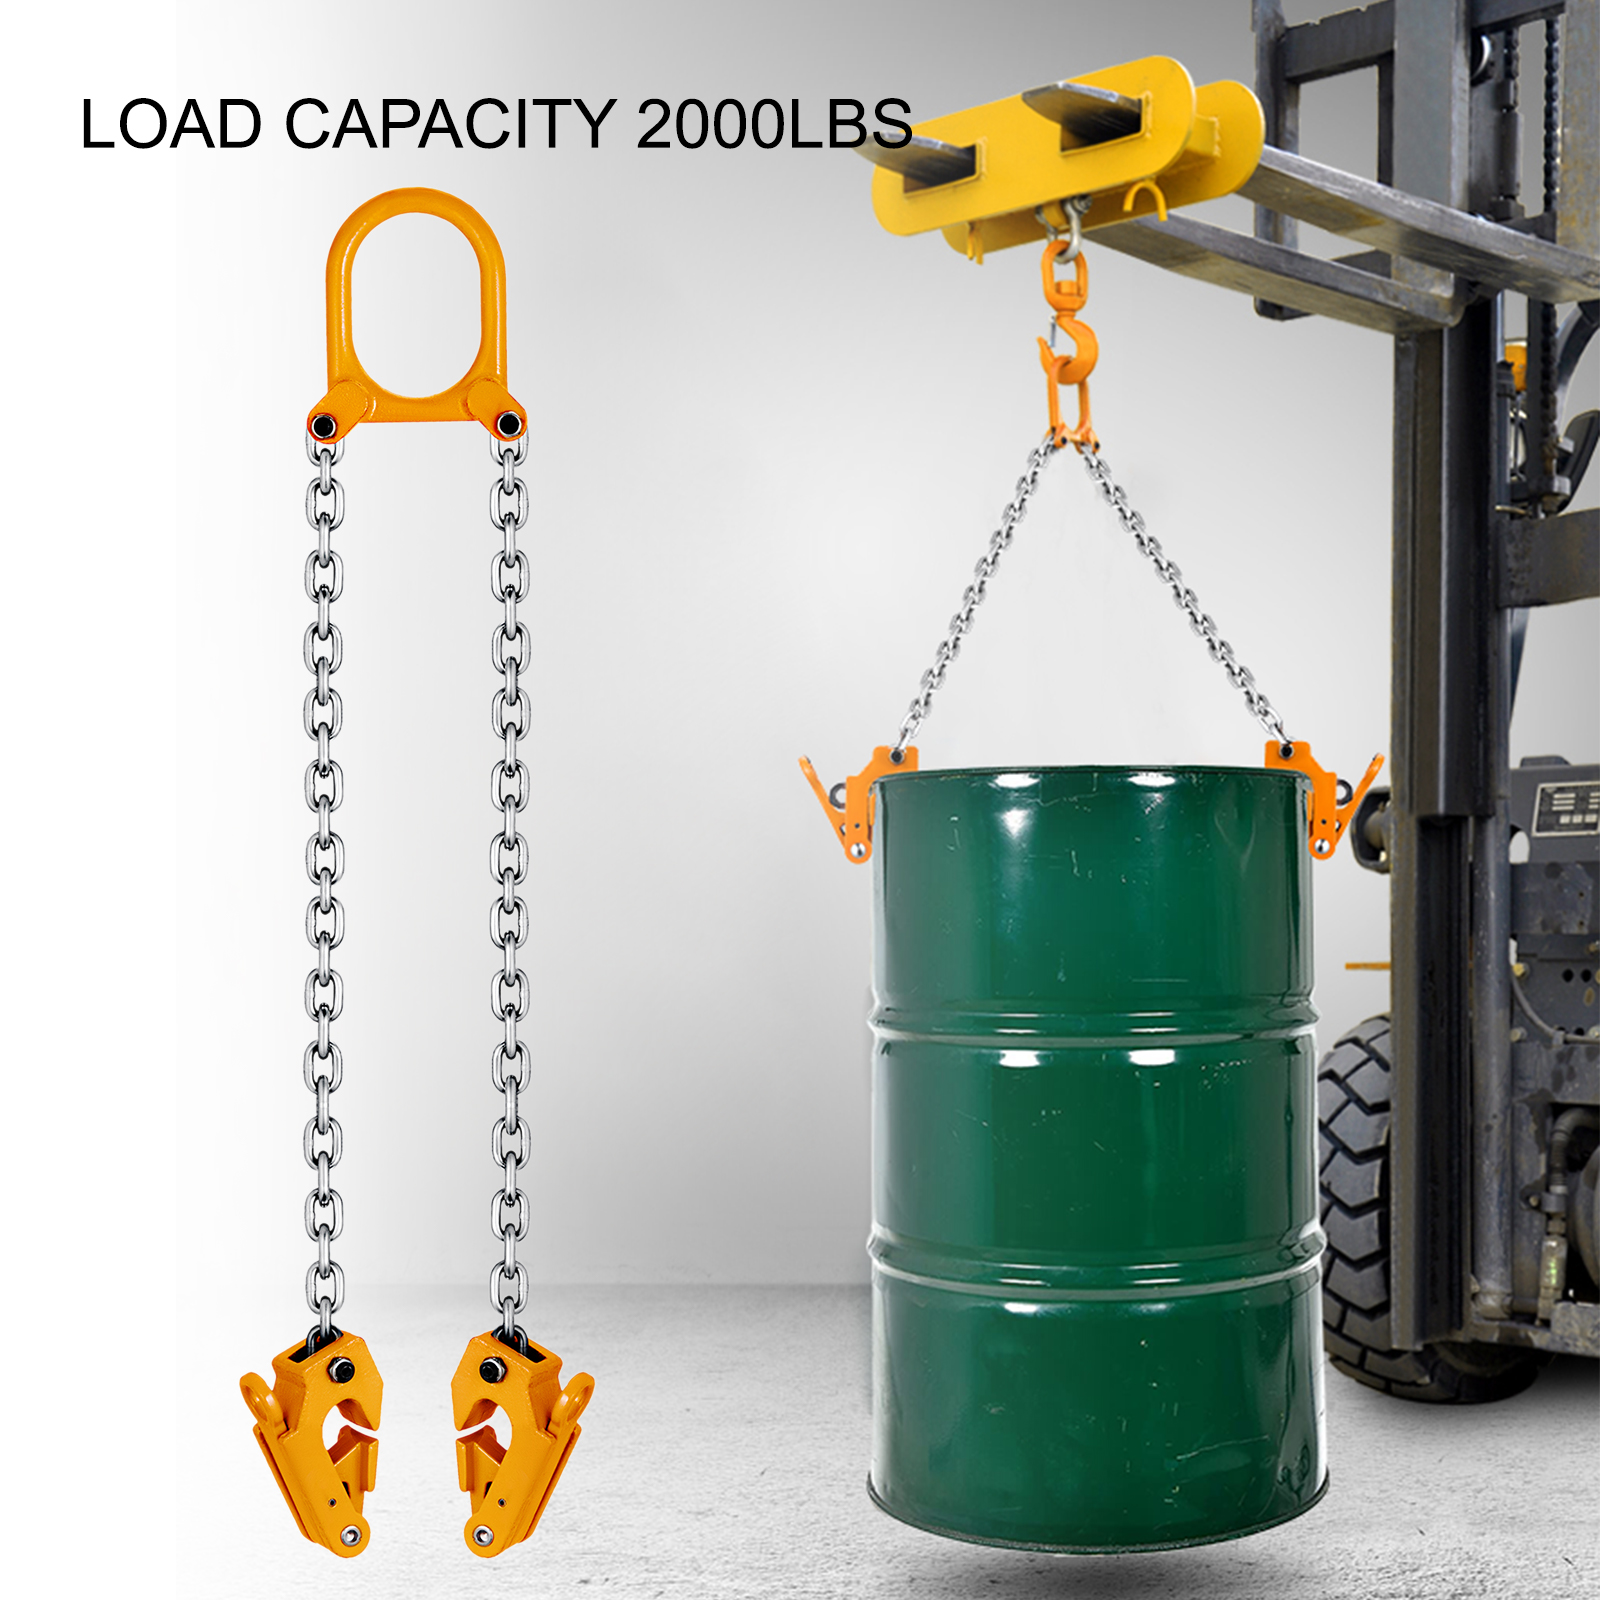 2000 lbs Capacity 2000 LBS Chain Drum Lifter Vertical Drum Lifter YELLOW TOP 